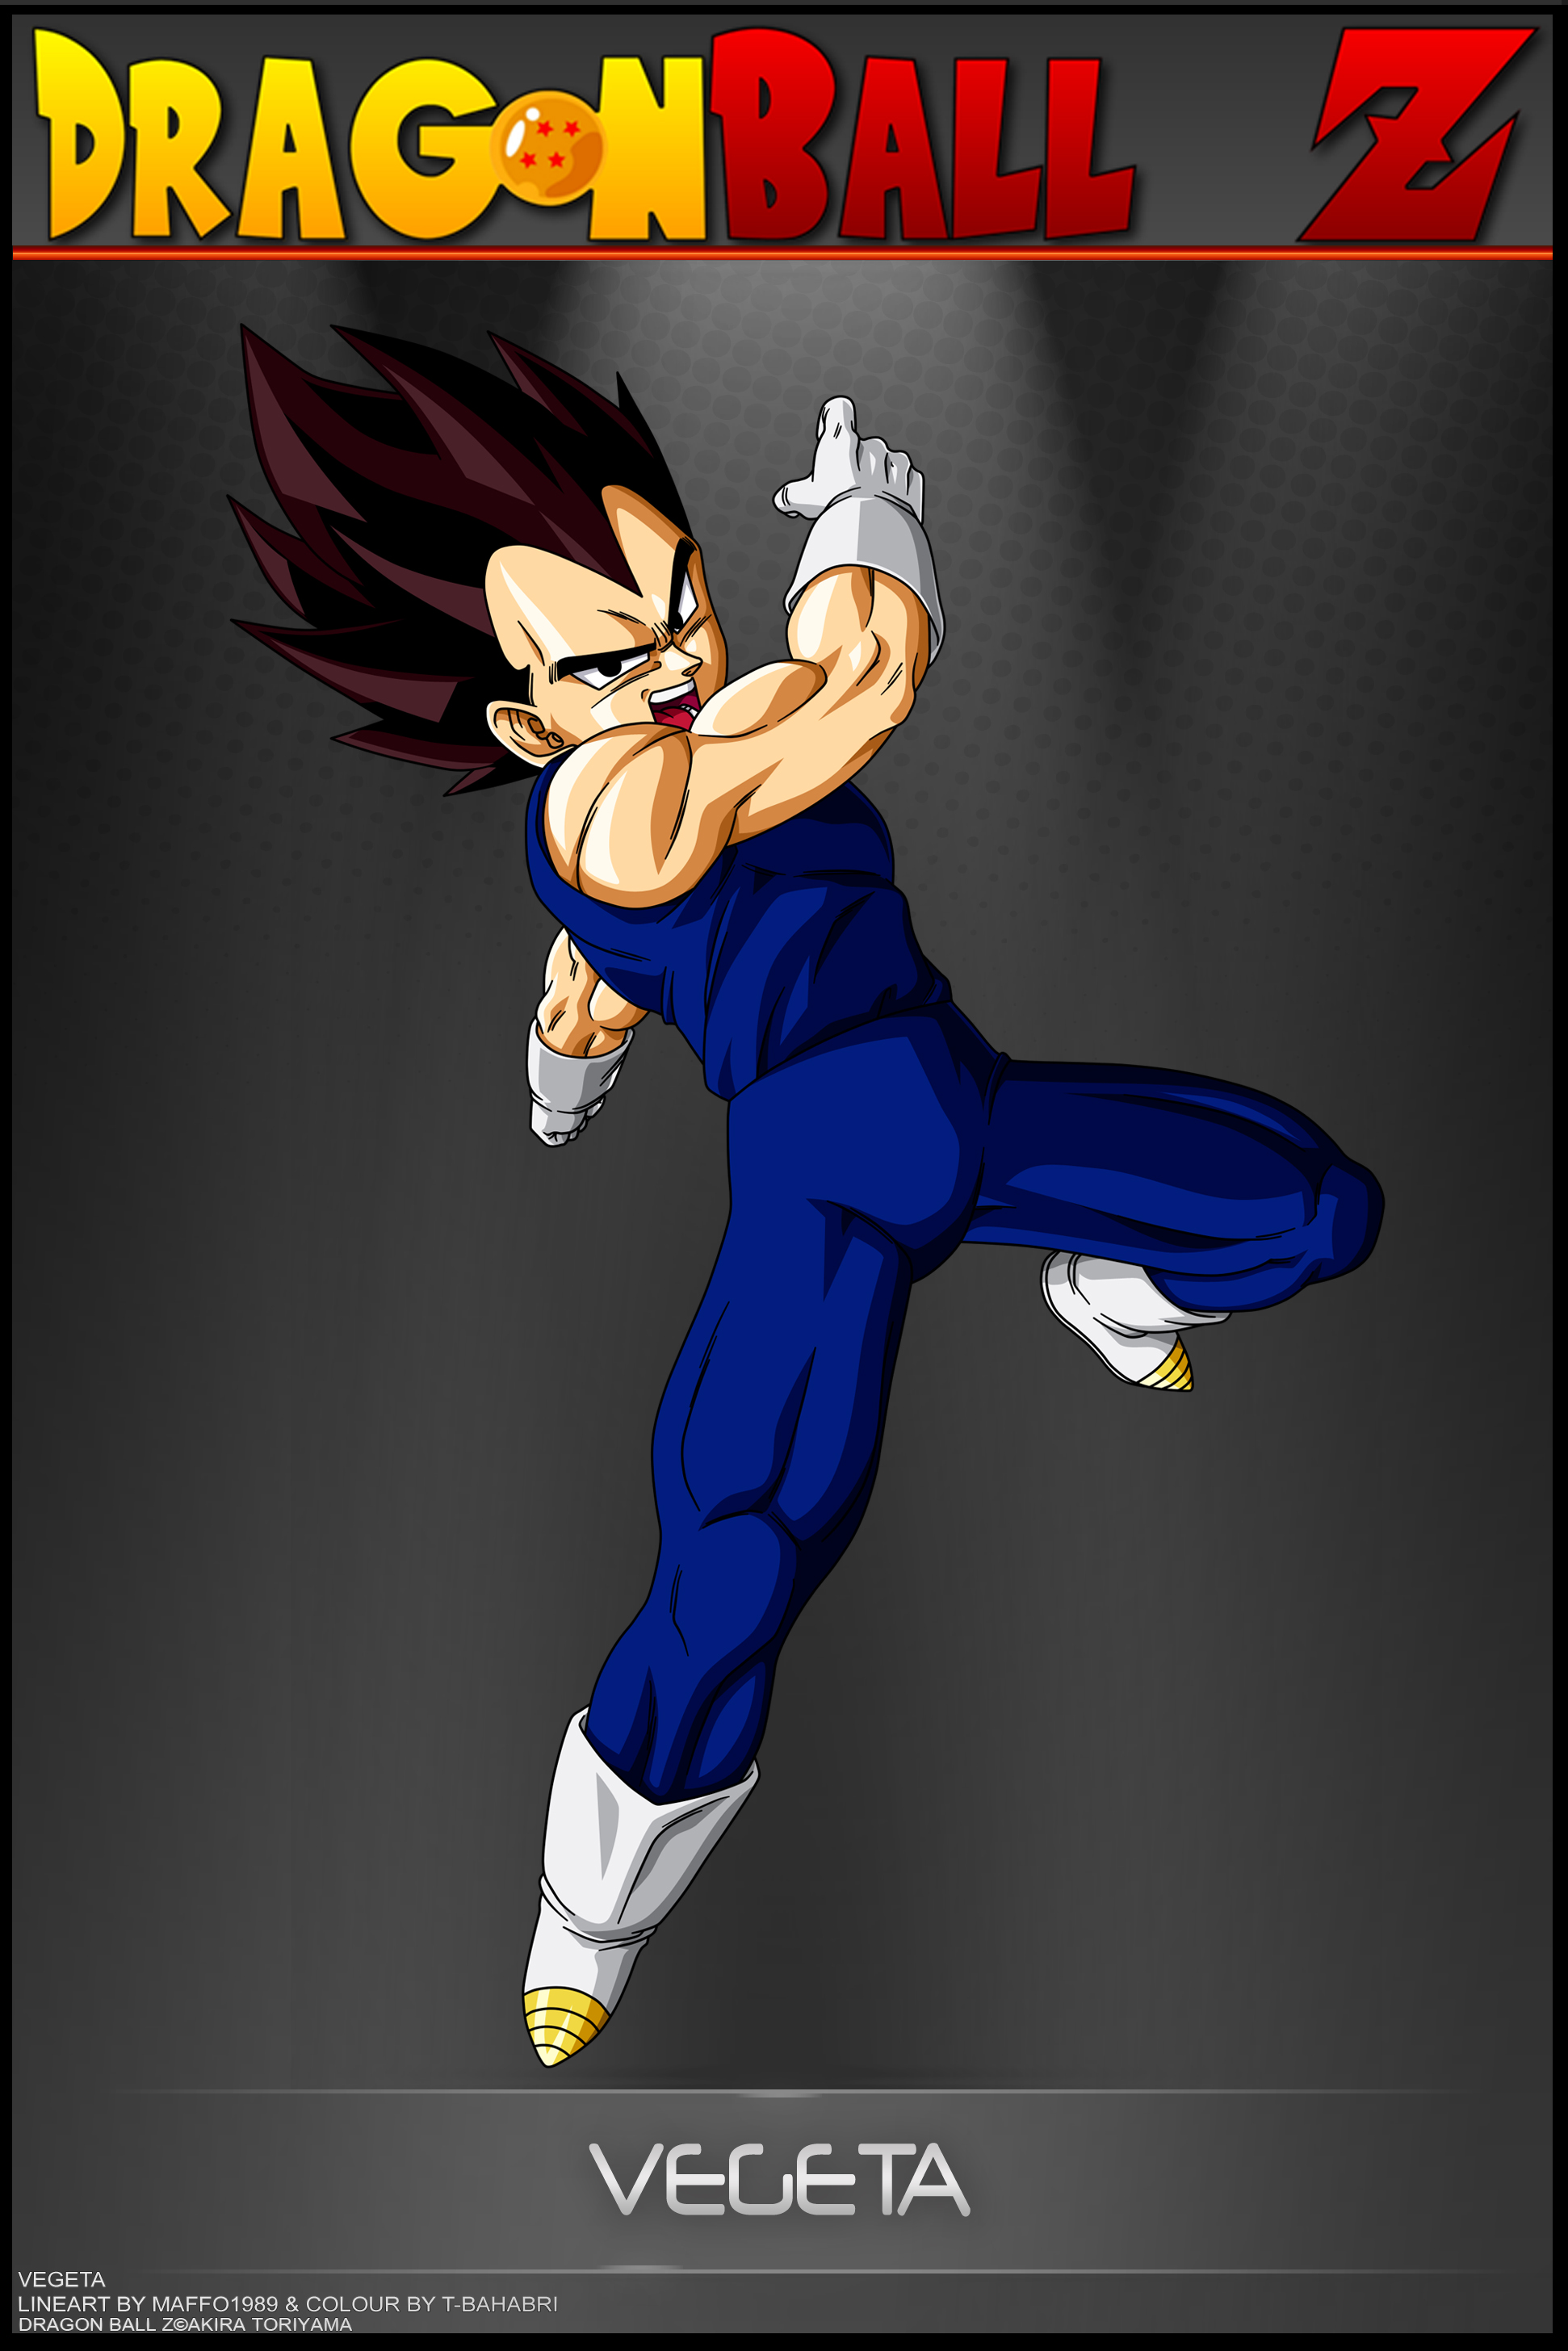 Dragon Ball Z - Vegeta Vs Pui Pui by DBCProject on DeviantArt